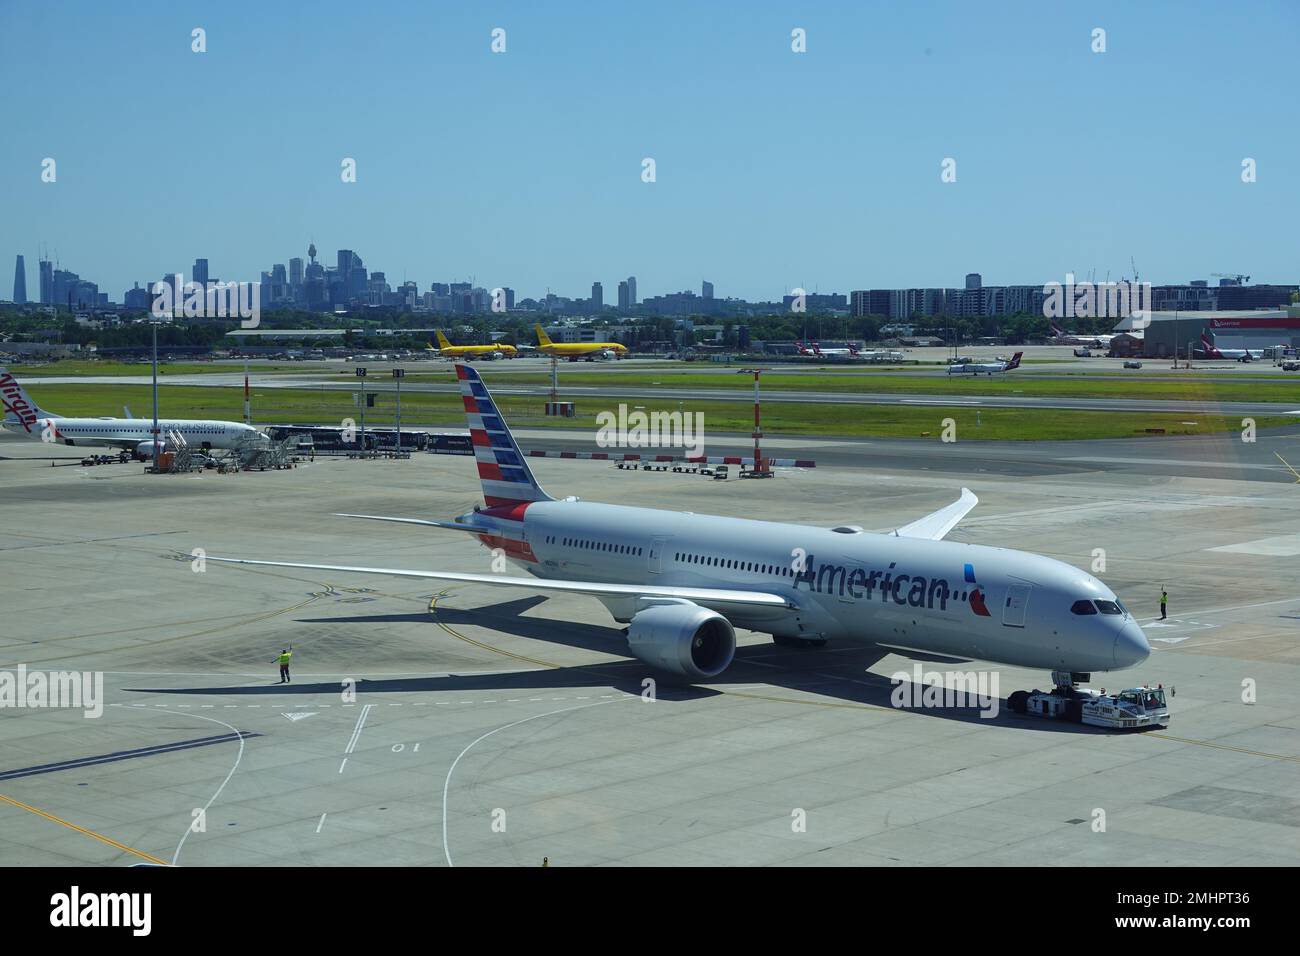 January 2023, American Airways plane at Sydney Kingsford Smith airport with Sydney city skyline in the distance. Stock Photo